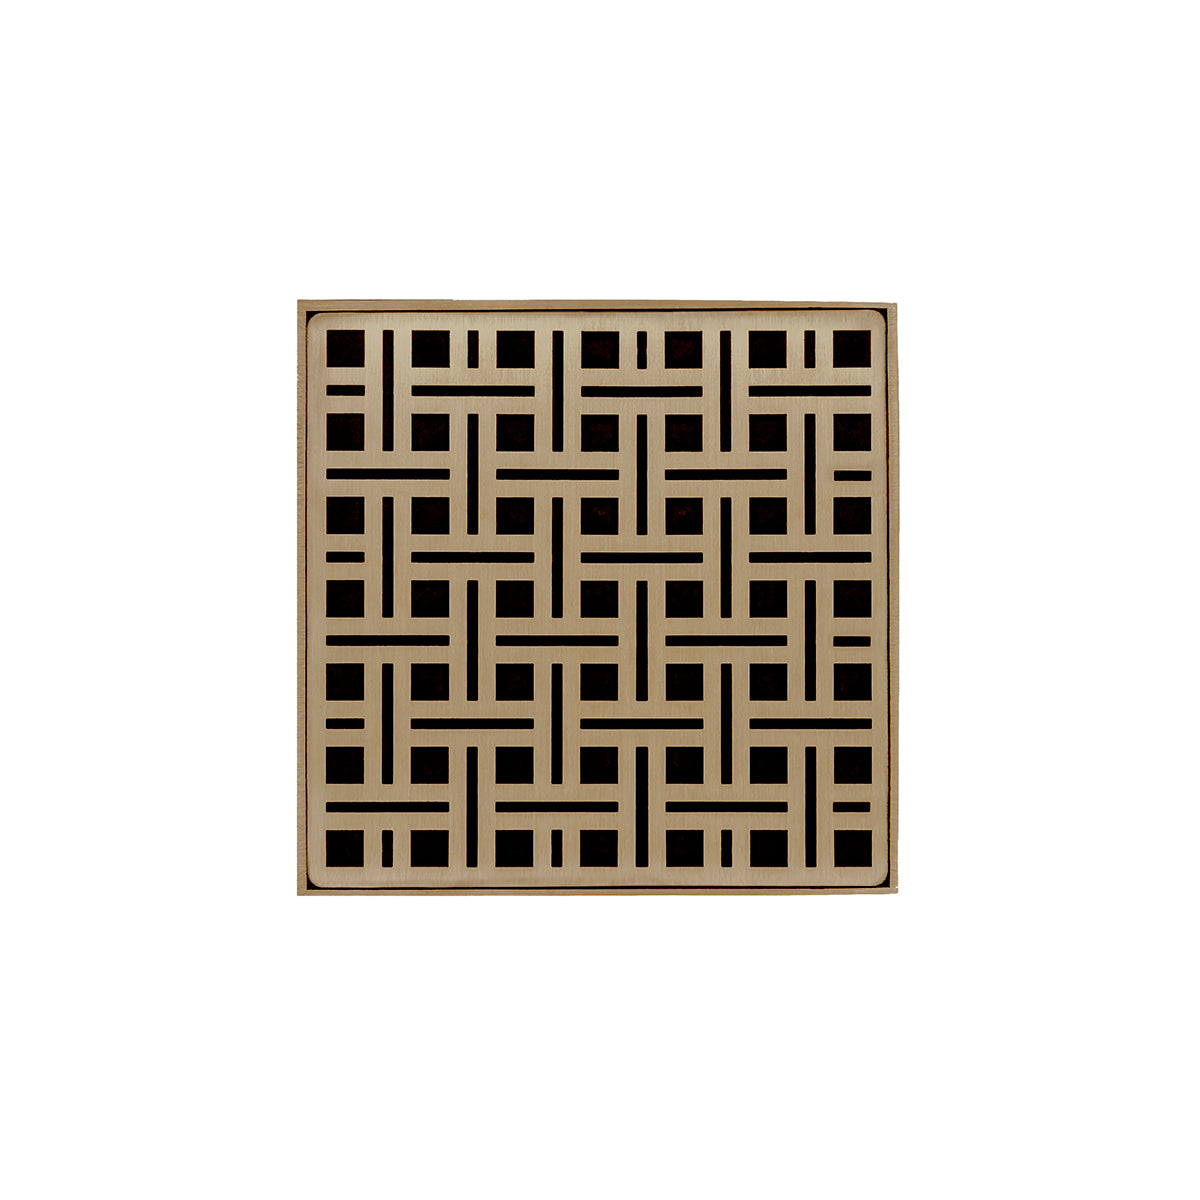 Infinity Drain 5" x 5" VD 5 High Flow Premium Center Drain Kit with Weave Pattern Decorative Plate with ABS Drain Body, 3" Outlet